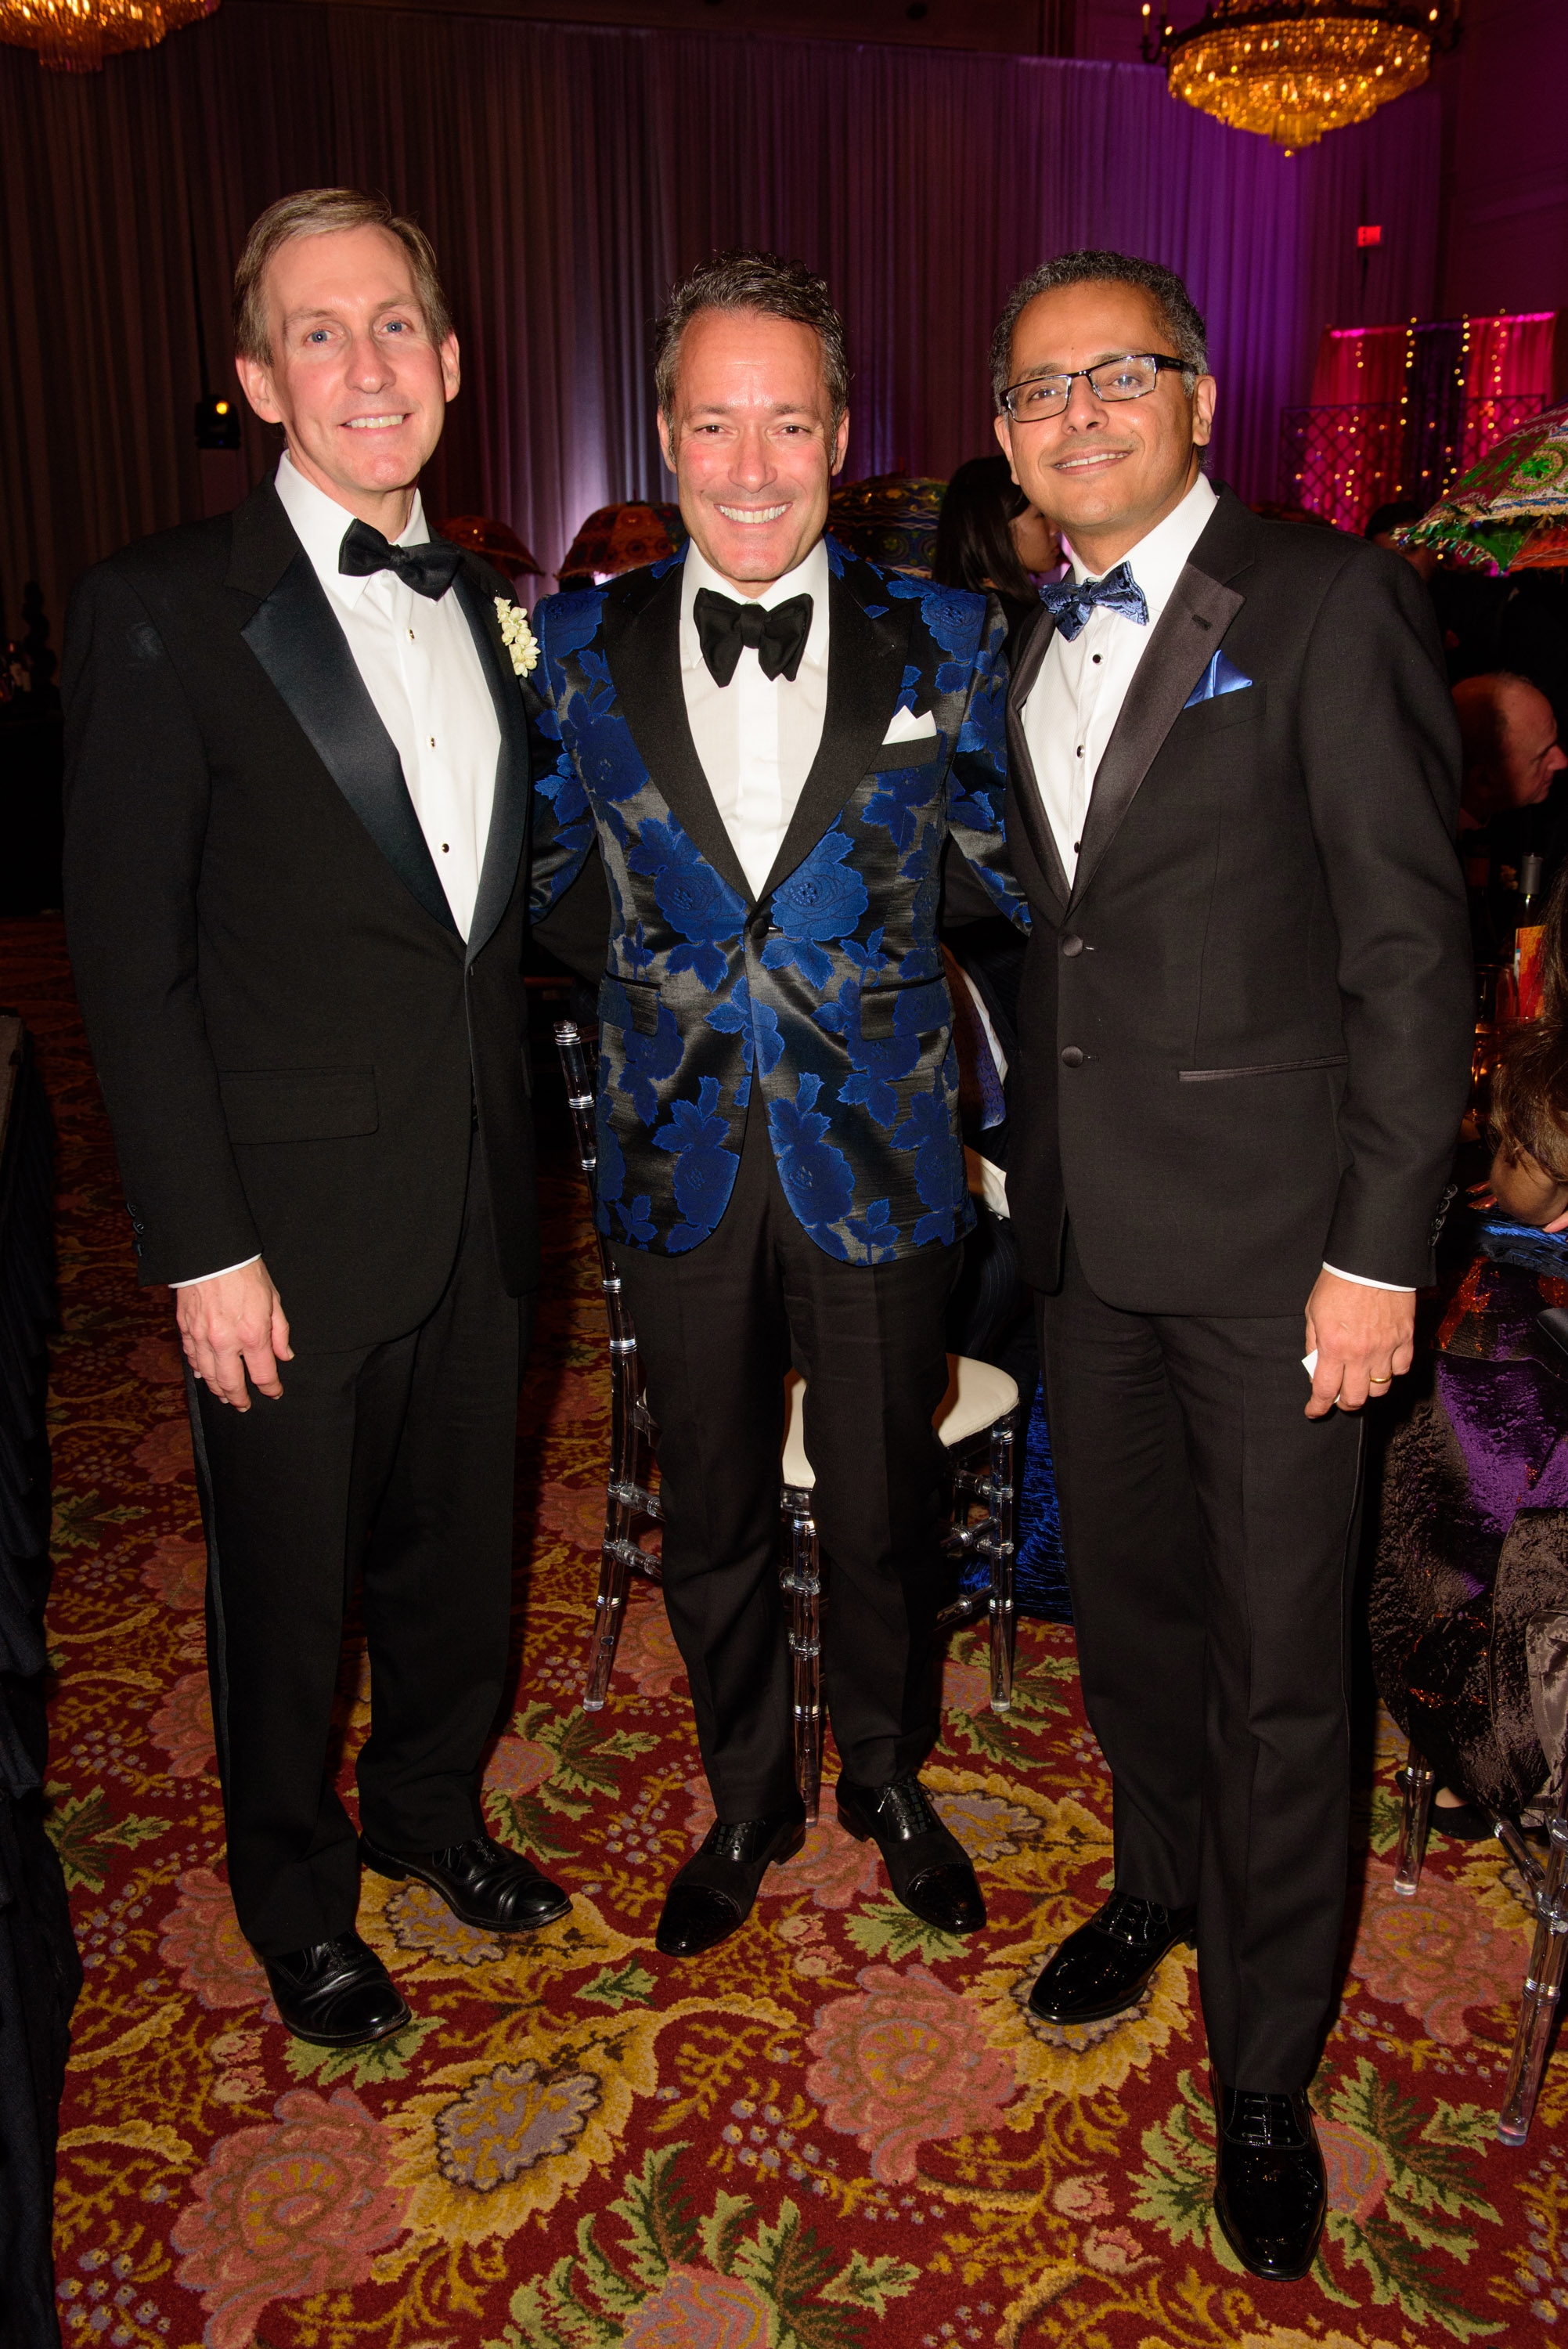 Dr Peter Pisters President and CEO UHN, Richard Wachsberg TGWHF Board Member and Dr Anil Chopra Medical Director Emergency Medicine UHN